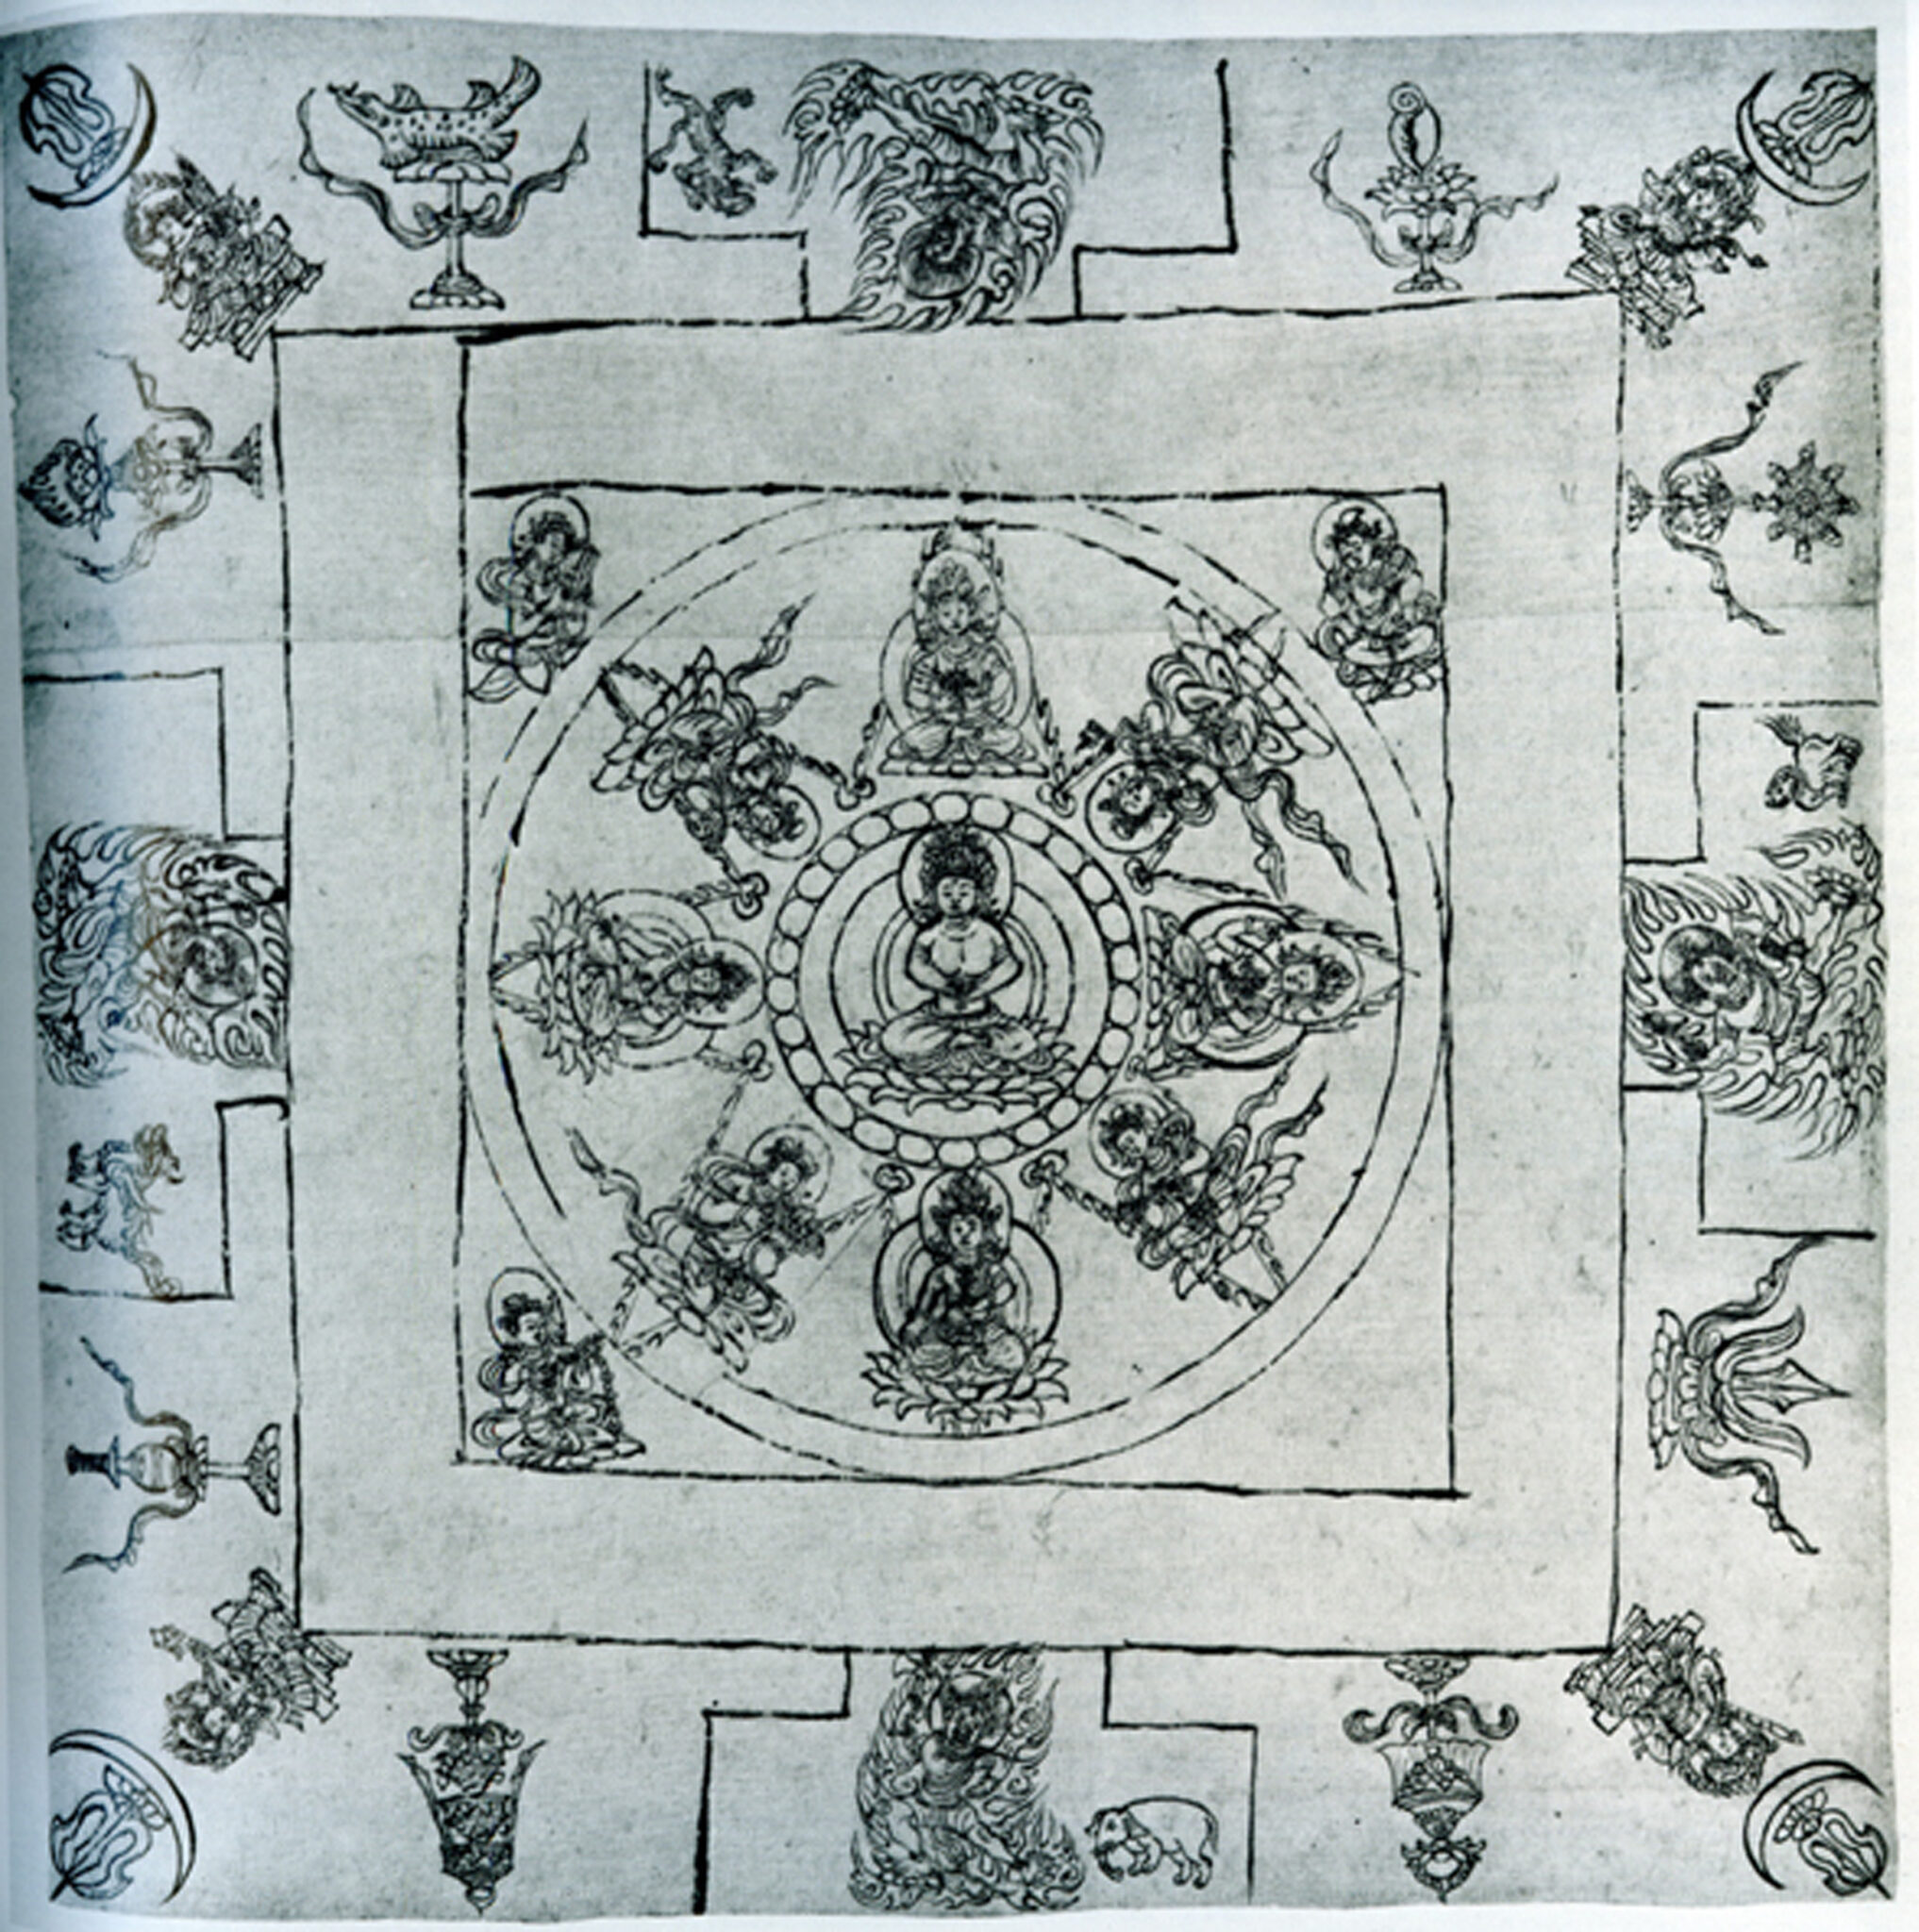 Line drawing featuring Buddha at center surrounded by concentric rings and square frames decorated with symbols and figures